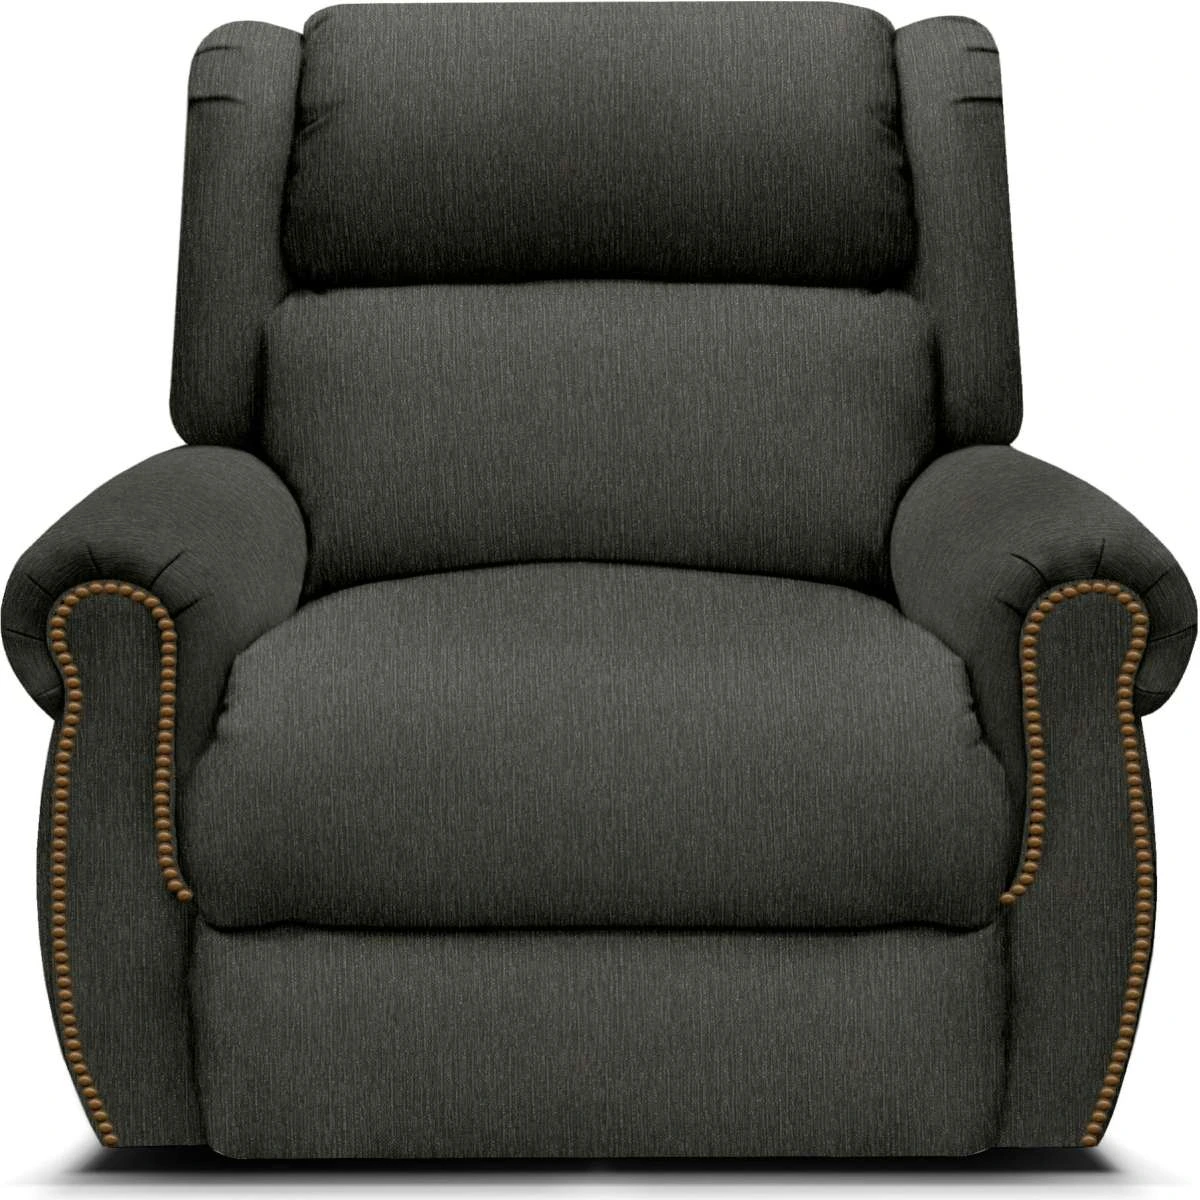 Front view of the England Furniture EZ5H00 rocker recliner 